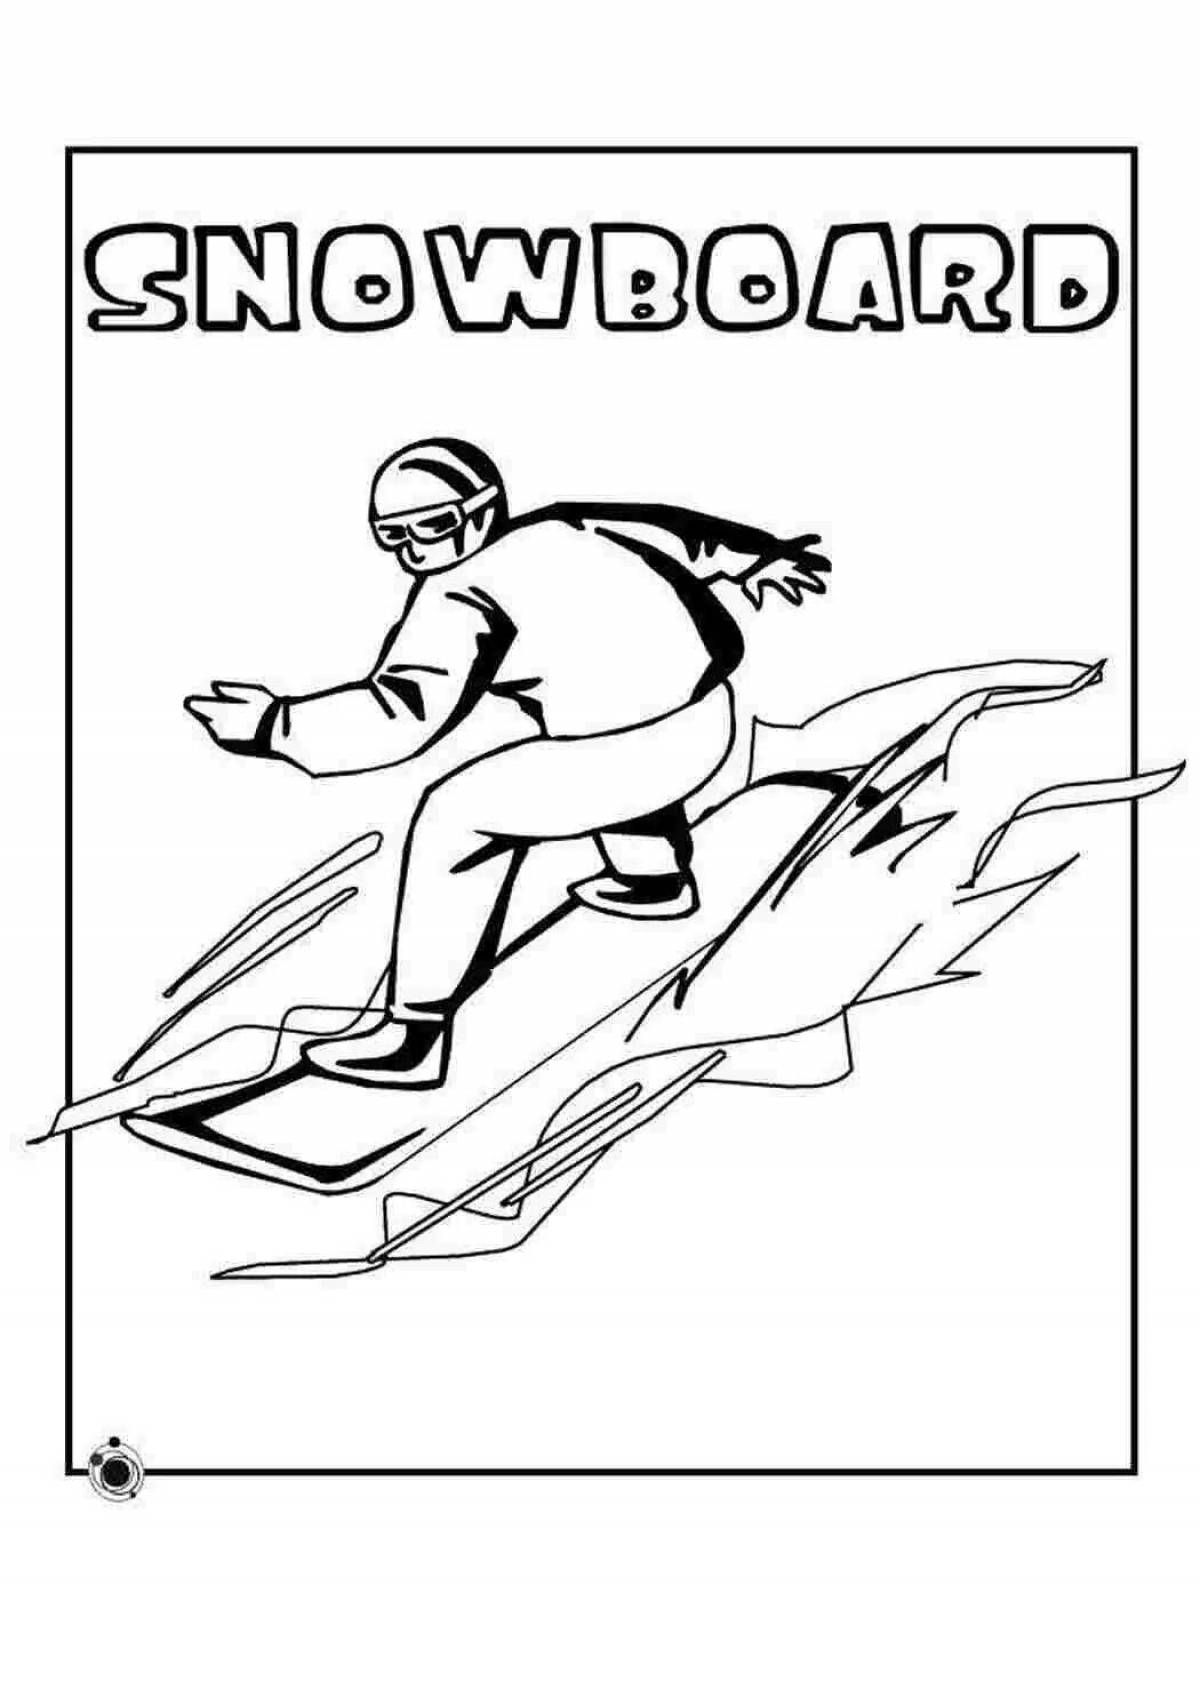 Creative snowboard coloring book for kids